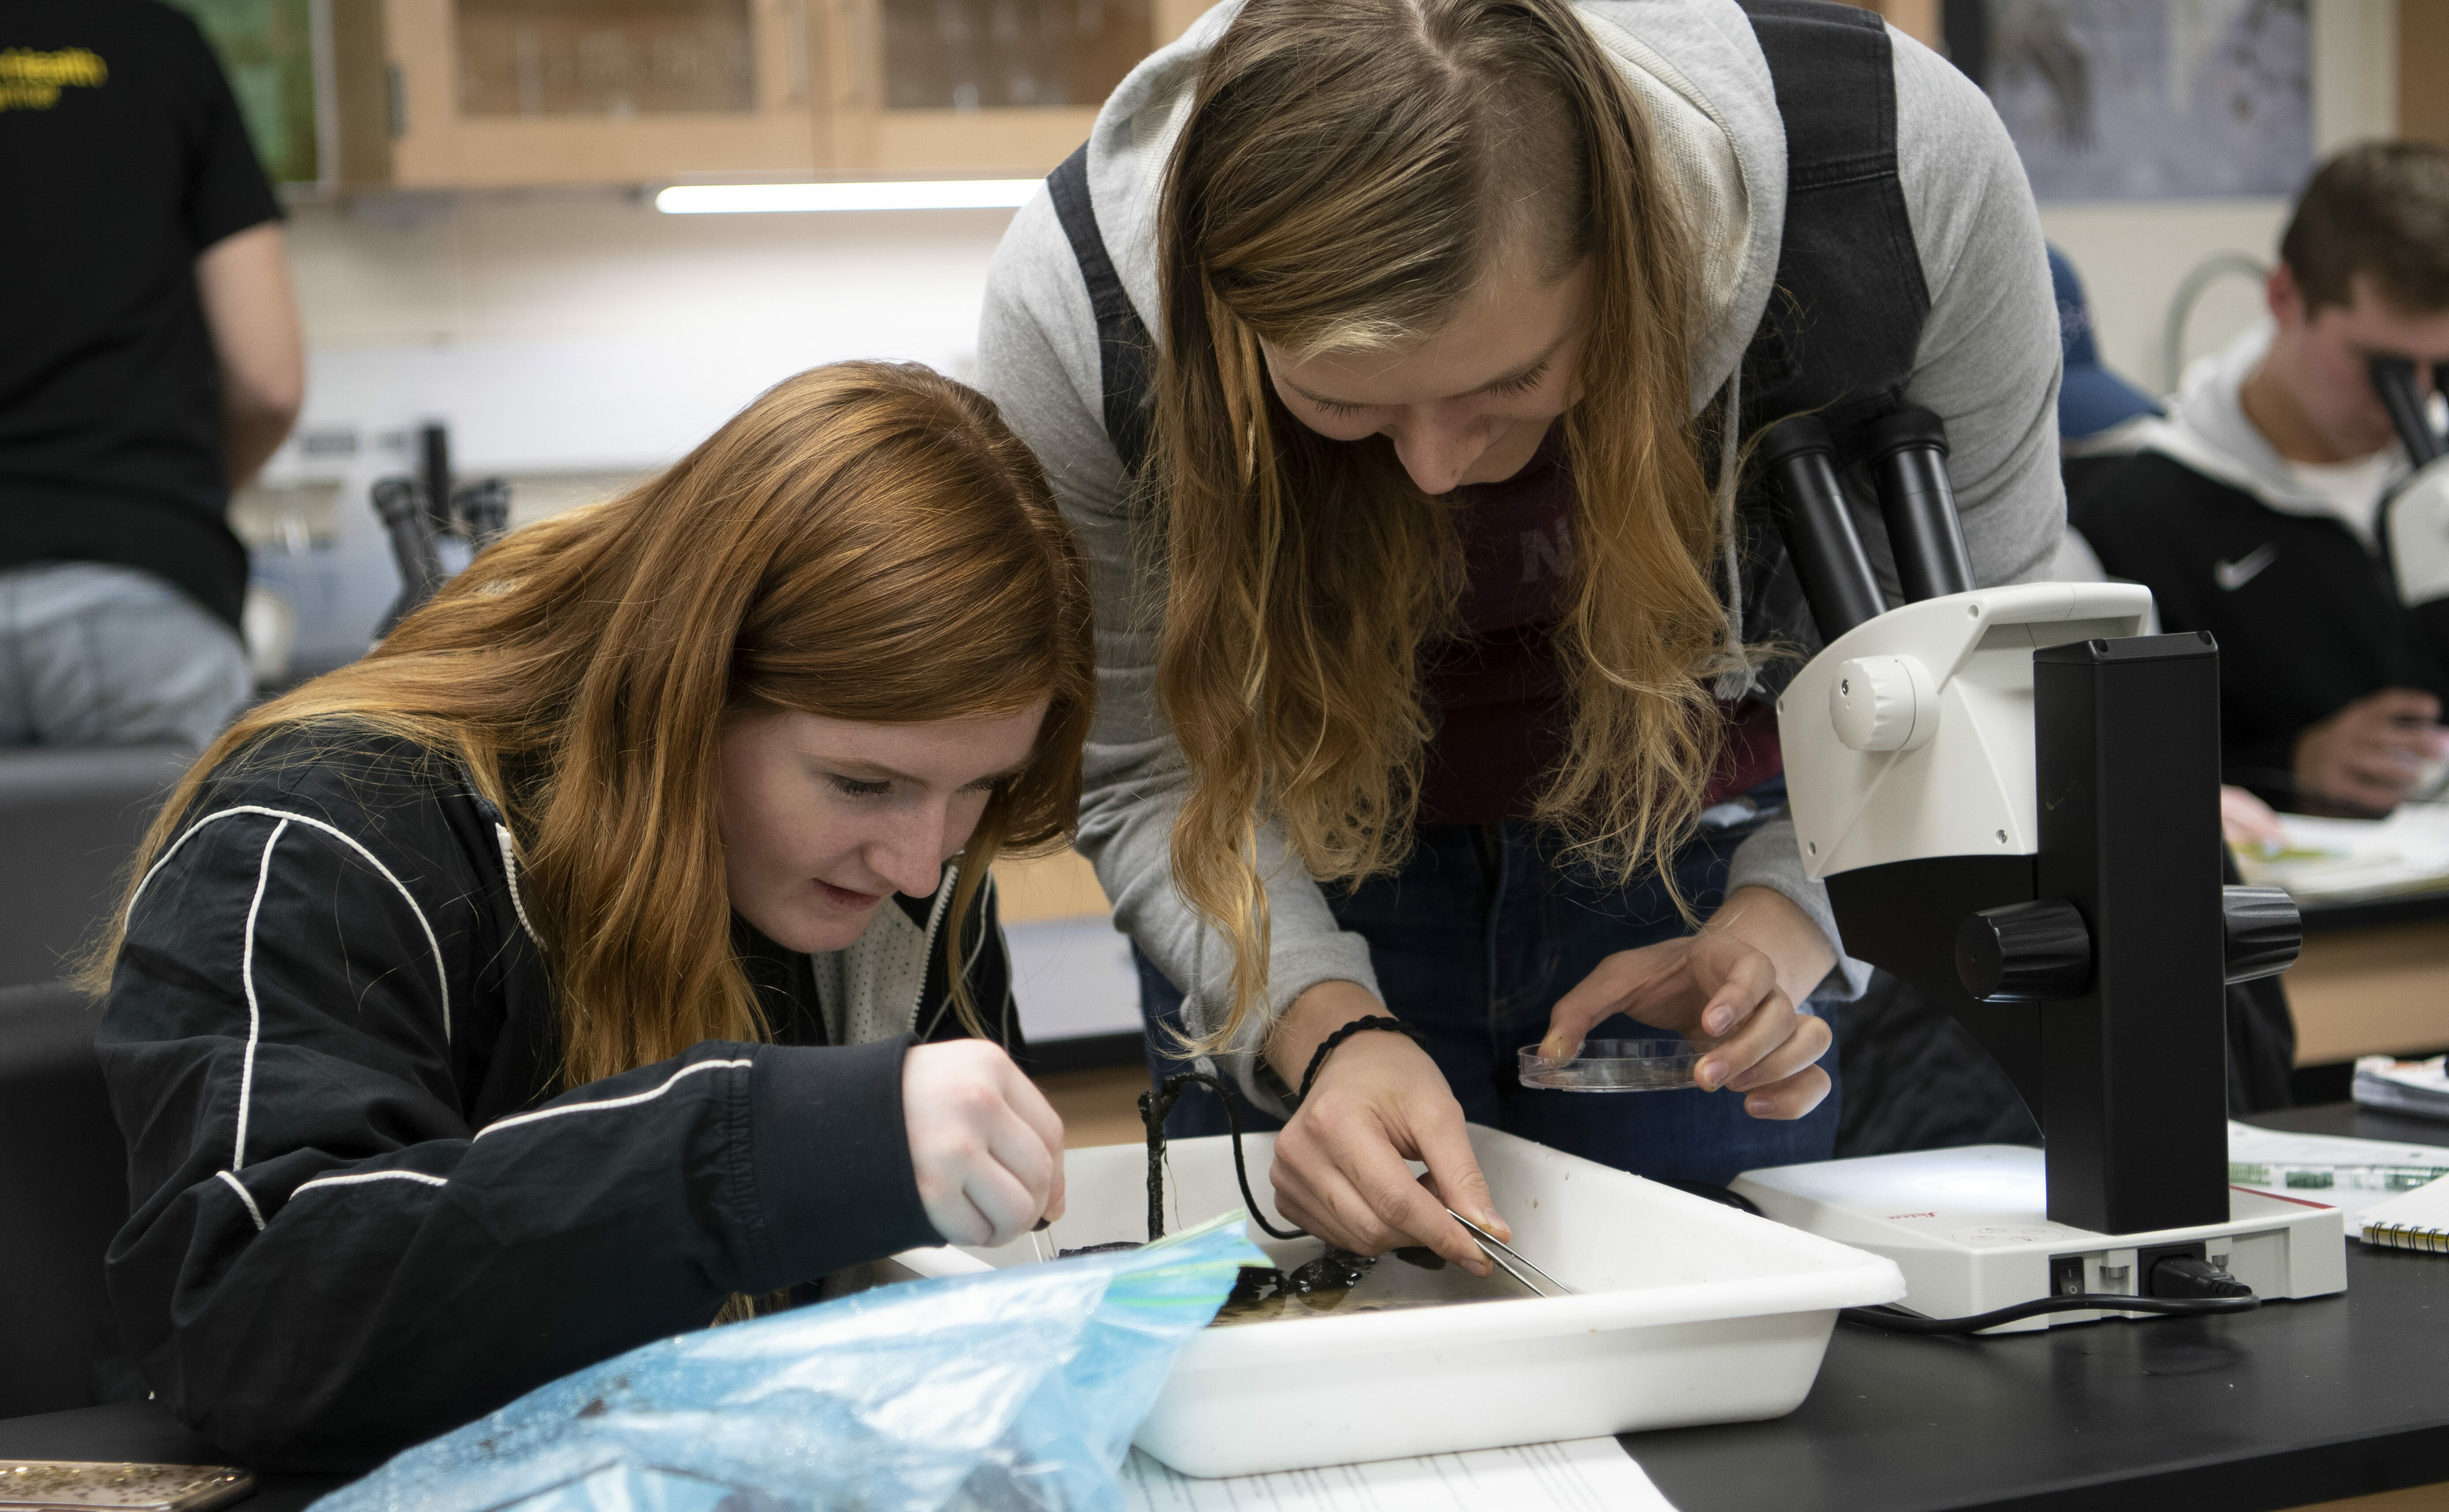 Two female students lean over a tray of samples to analyze them in the lab with a microscope